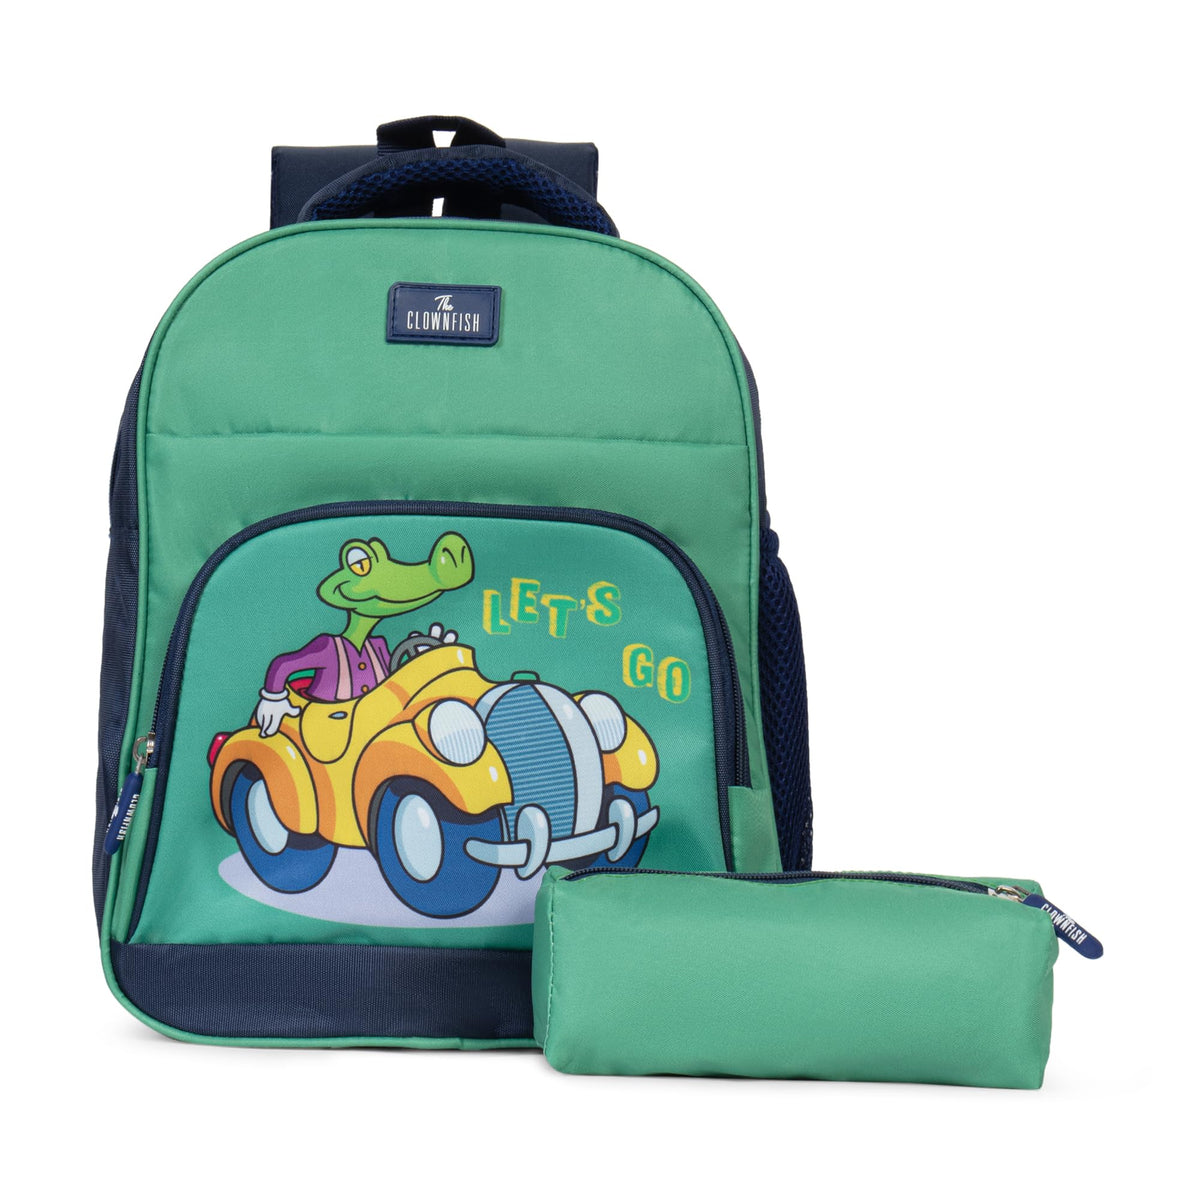 THE CLOWNFISH Mini Explorer Series Printed Polyester 12 Litres Kids Backpack School Bag with Pencil Staionery Pouch Daypack Picnic Bag for Tiny Tots. Age 3-5 Years (Green - Car)